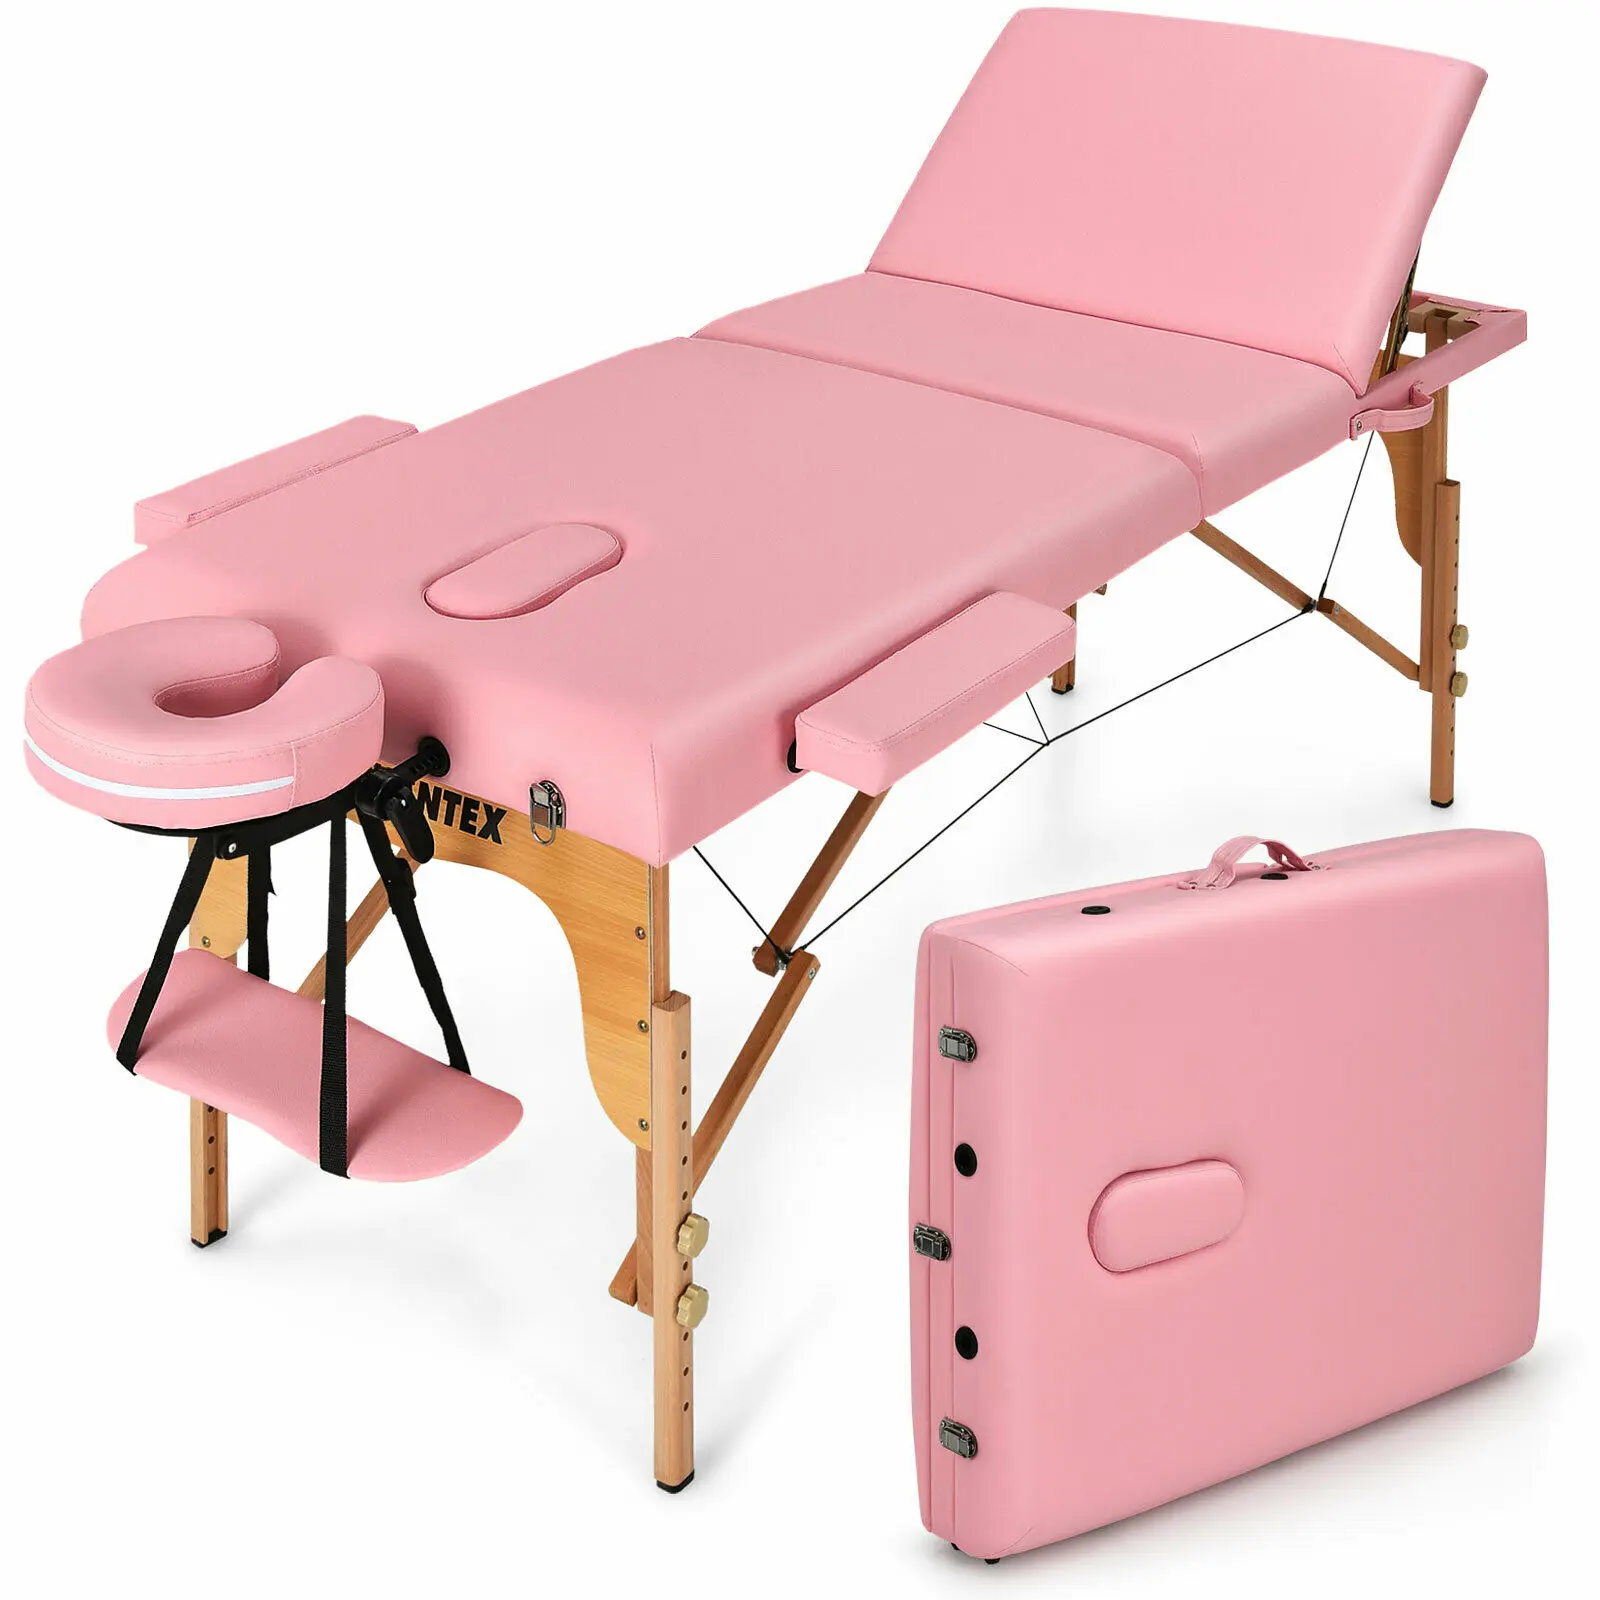 

Giantex Portable Massage Table 3 Fold 84"L Adjustable Spa Bed w/Carry Case Pink HB87018PI